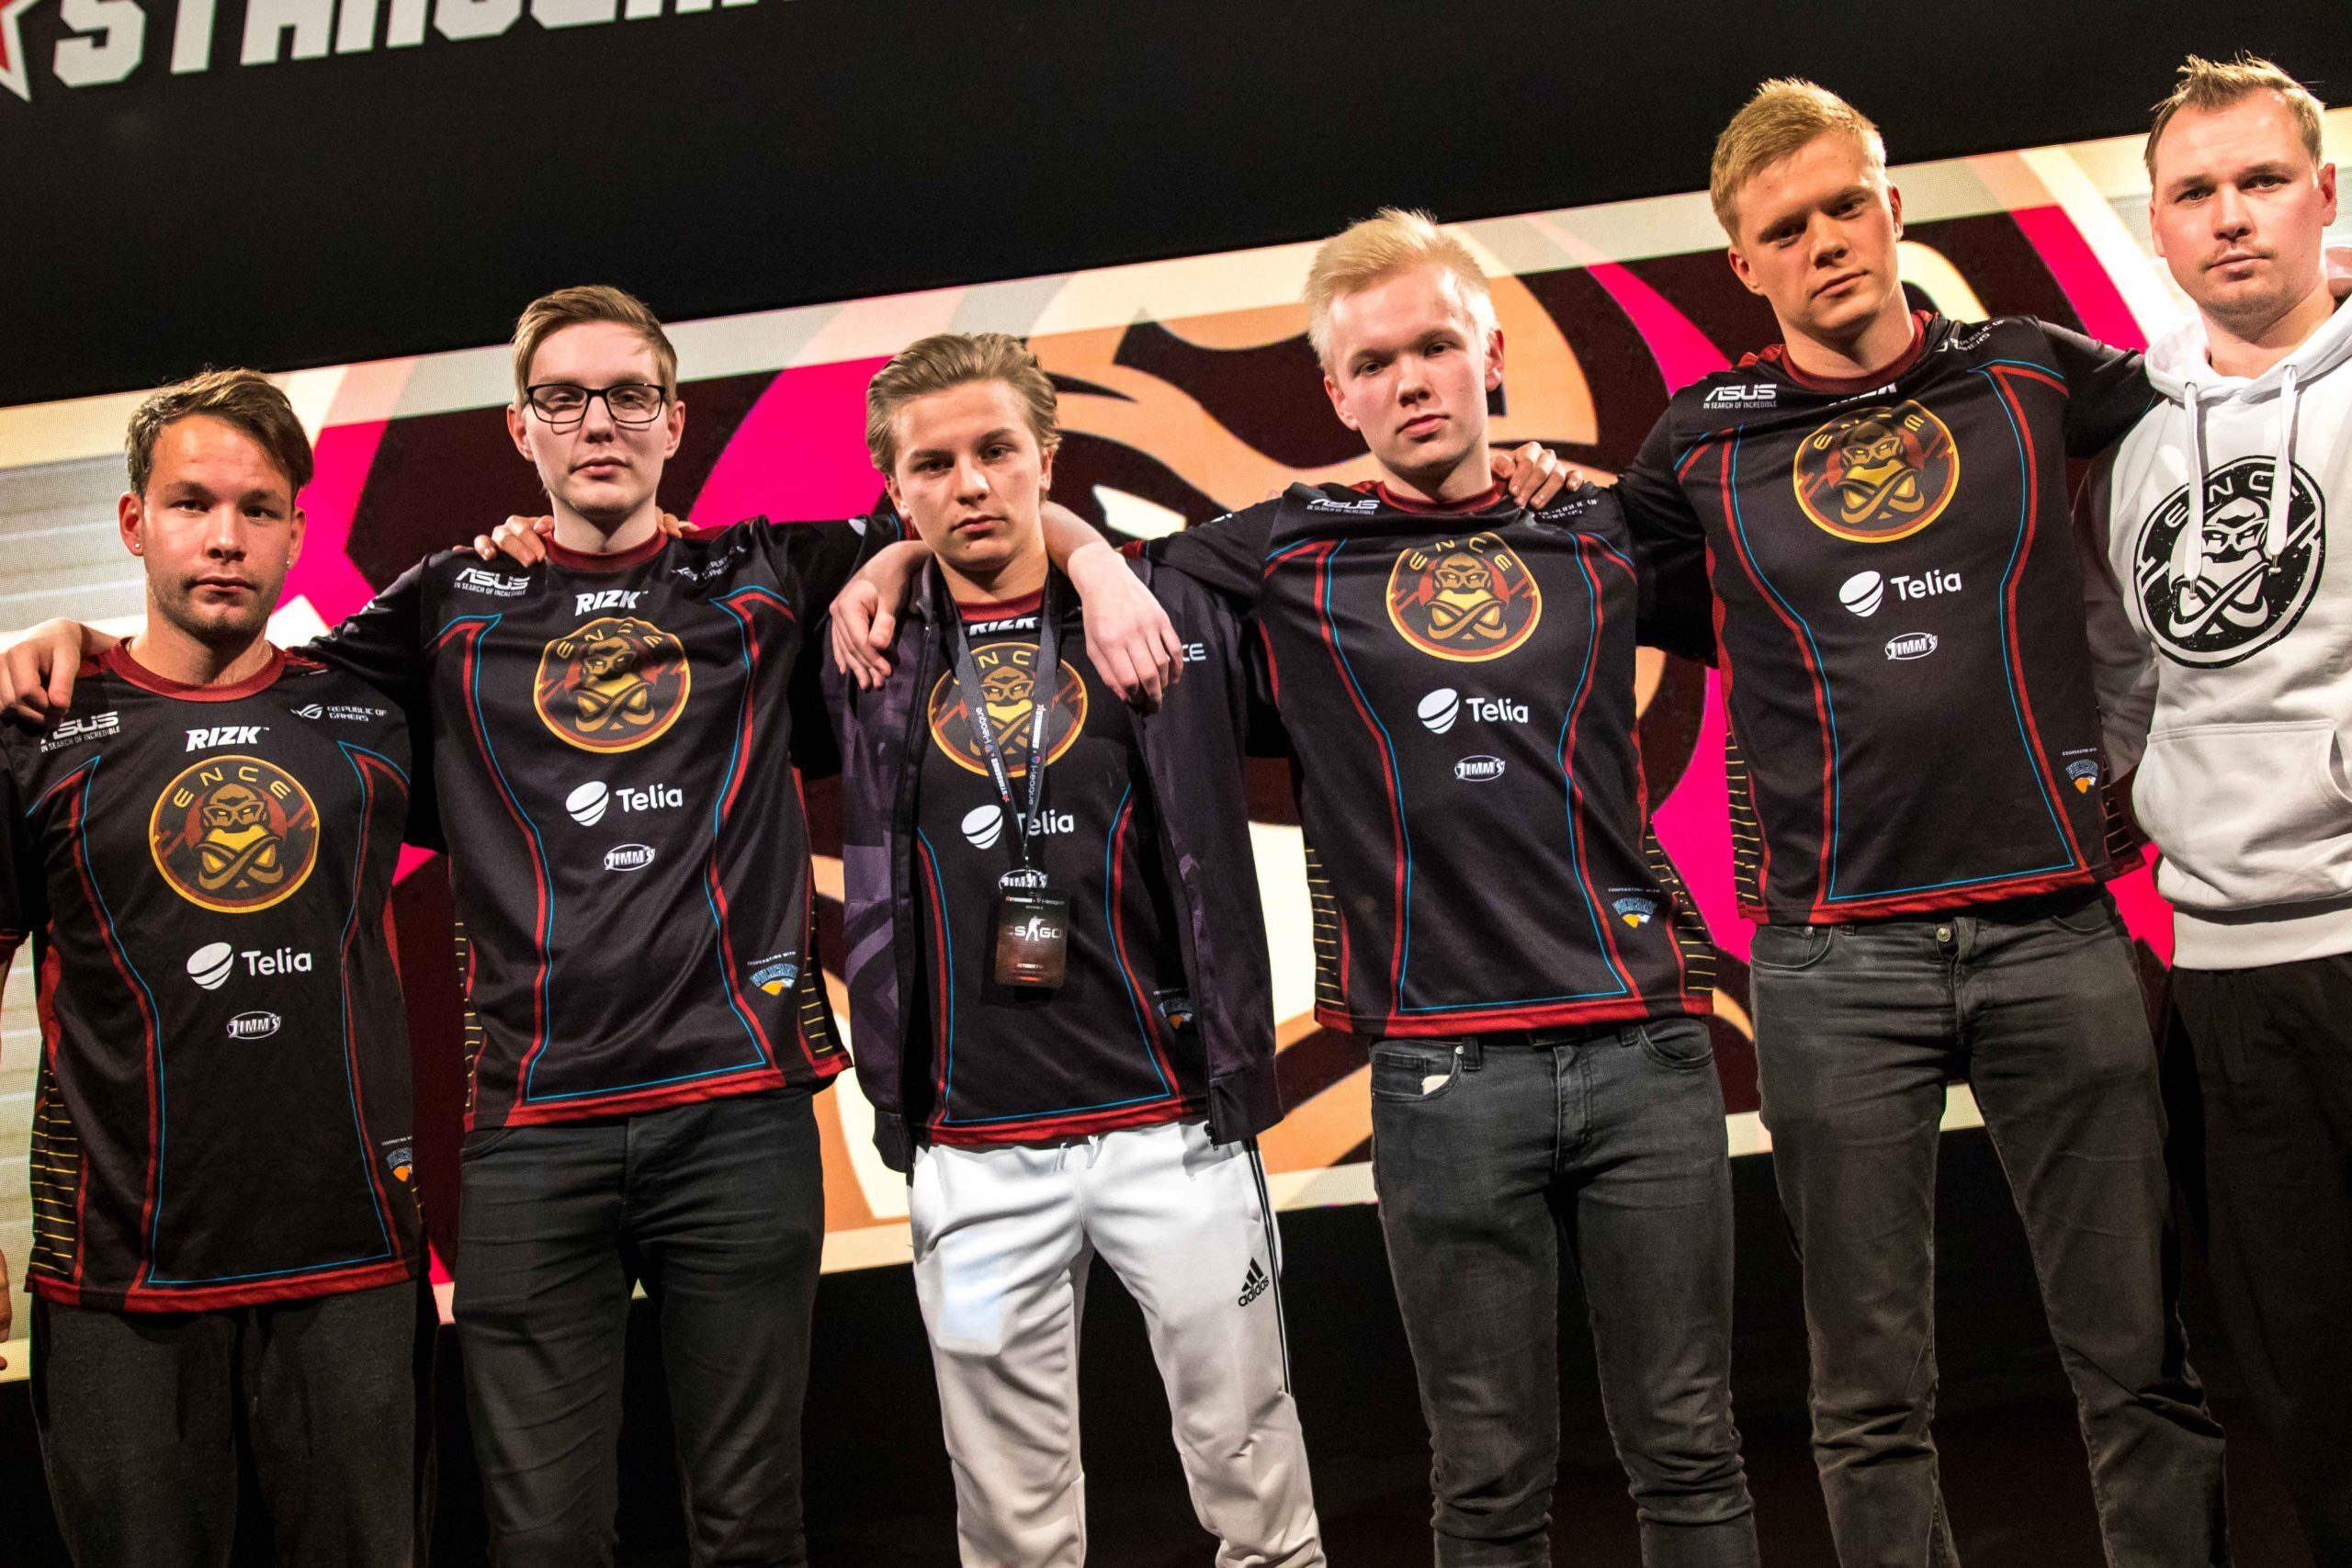 Finnish tacticians, ENCE, would take one step closer to their playoff dream in Katowice. (Image courtesy of Ence.gg)